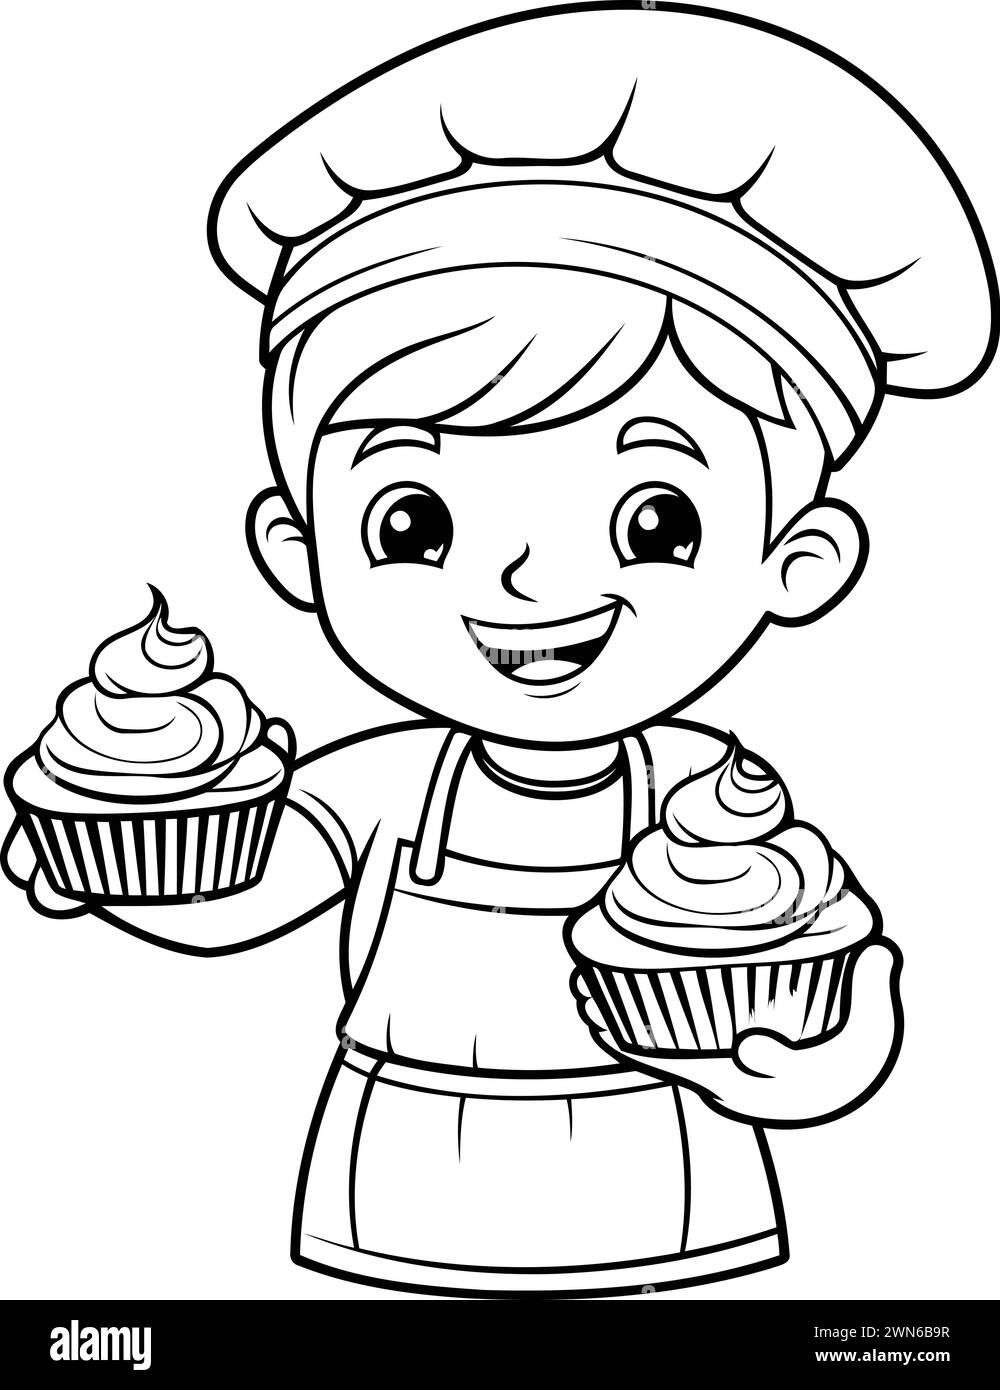 Coloring Page Outline Of Cartoon Cute Little Boy Chef With Cupcake Stock Vector